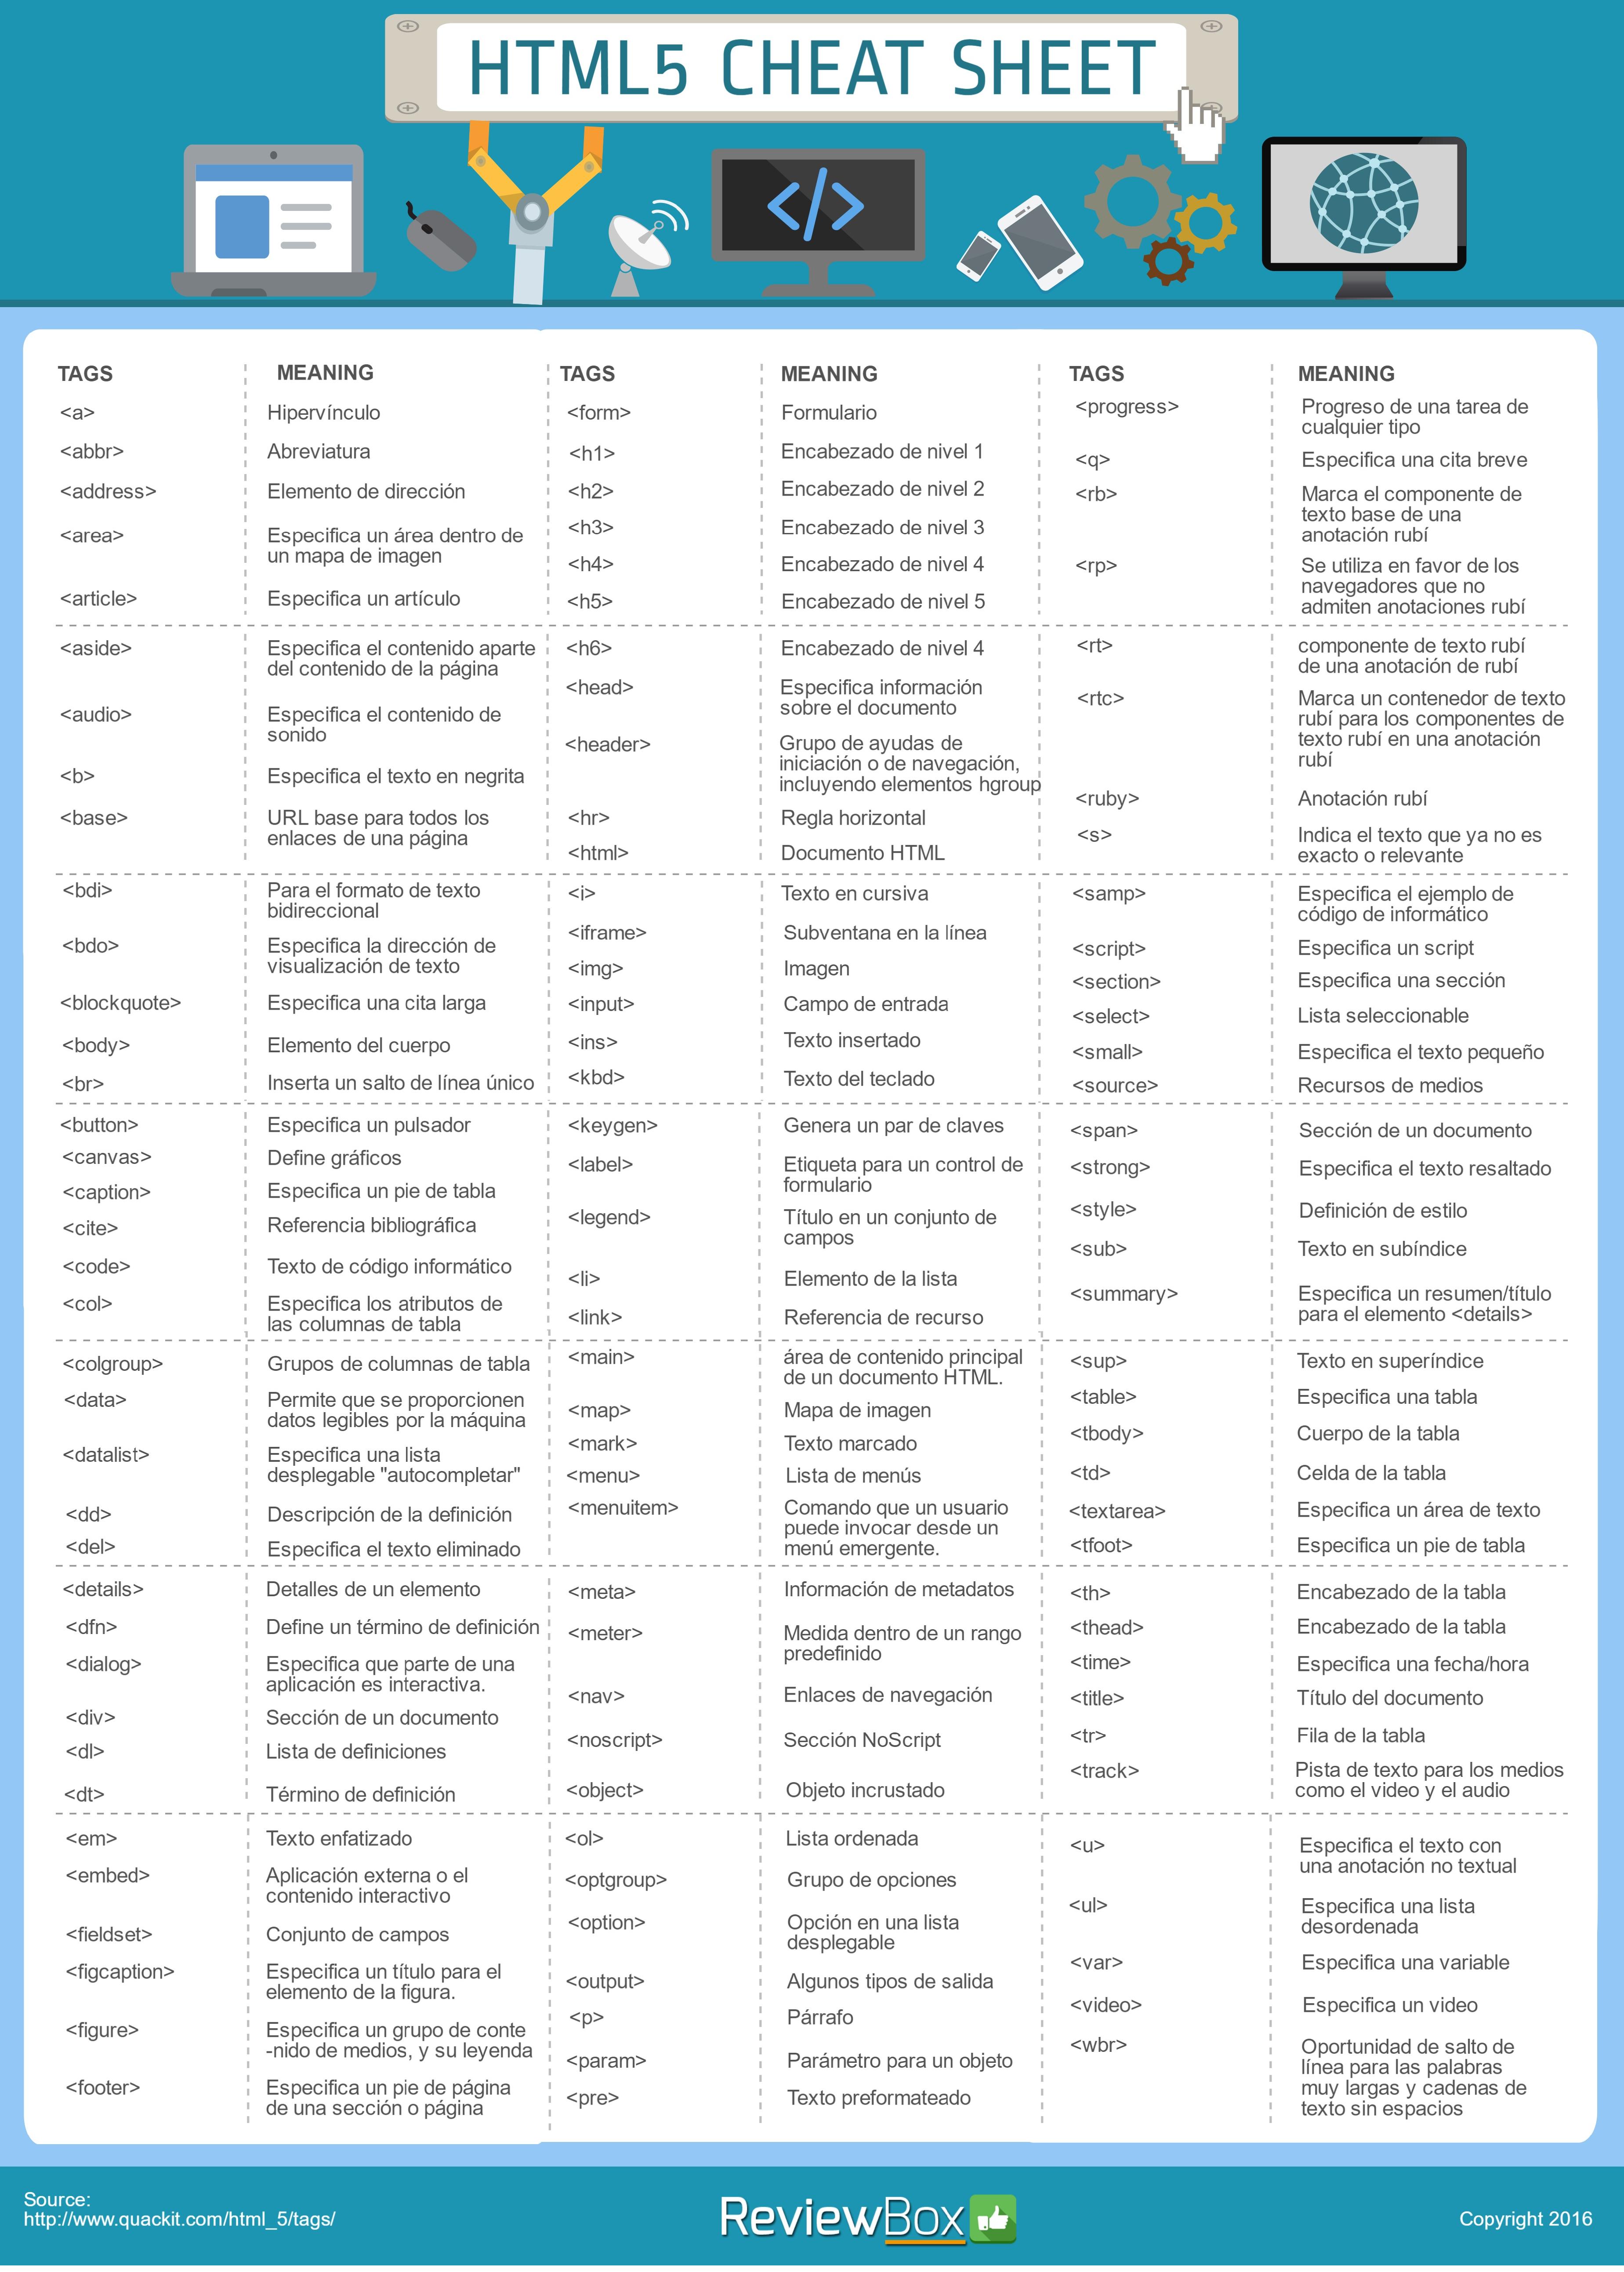 Cheatsheets - These are cheat sheets - qwertyuiopasdfghjklzxcvbnmq  wertyuiopasdfghjklzxcvbnmqw - Studocu